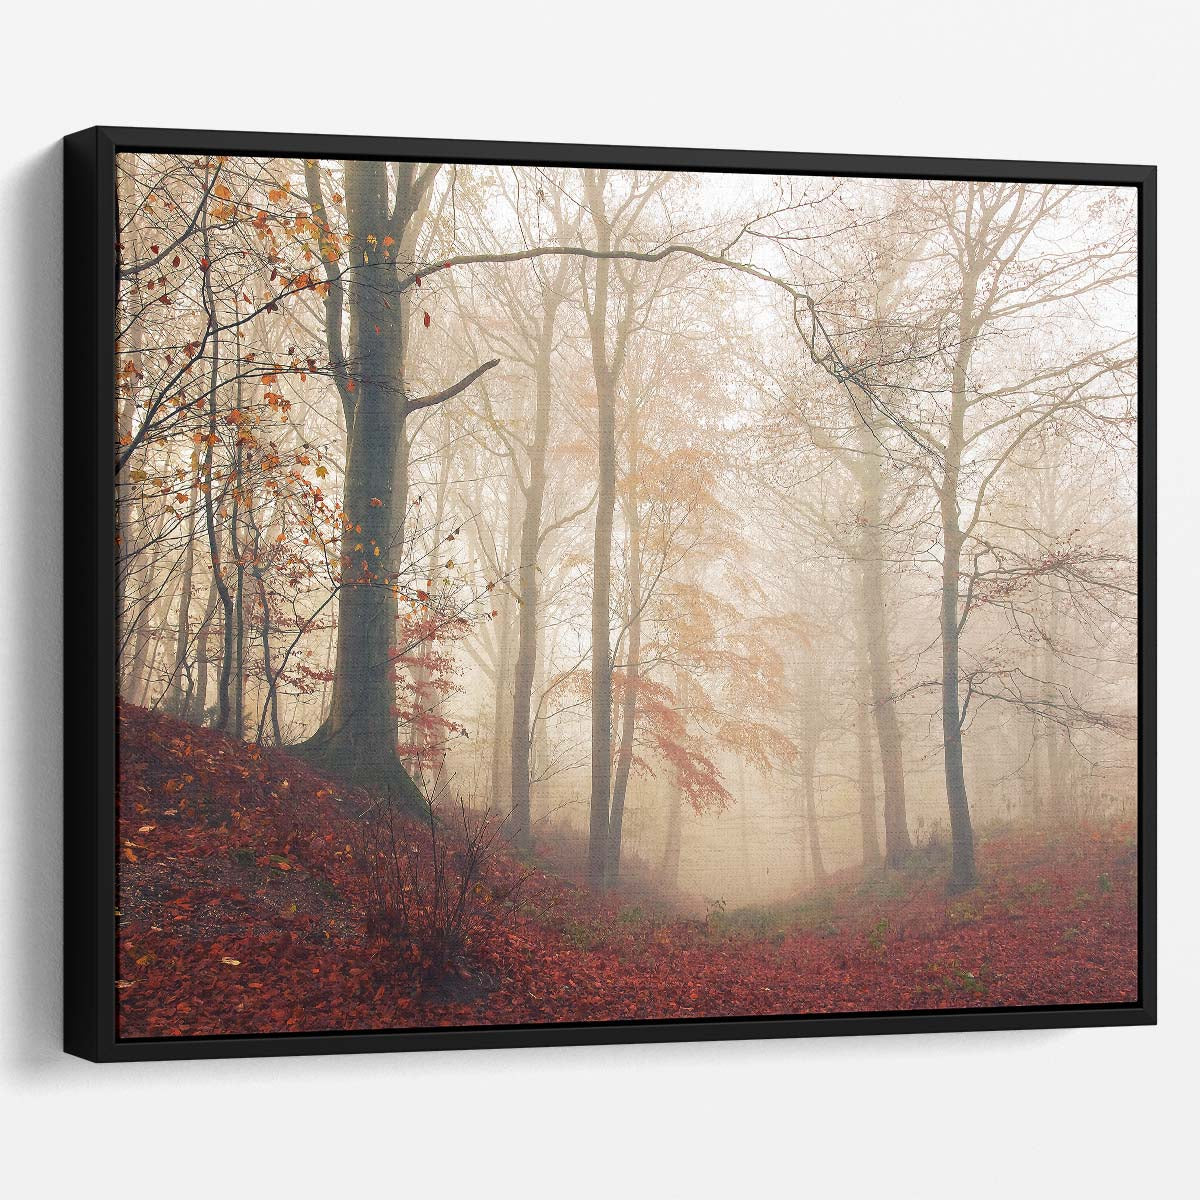 Autumnal Mist & Red Woods Forest Landscape Wall Art by Luxuriance Designs. Made in USA.